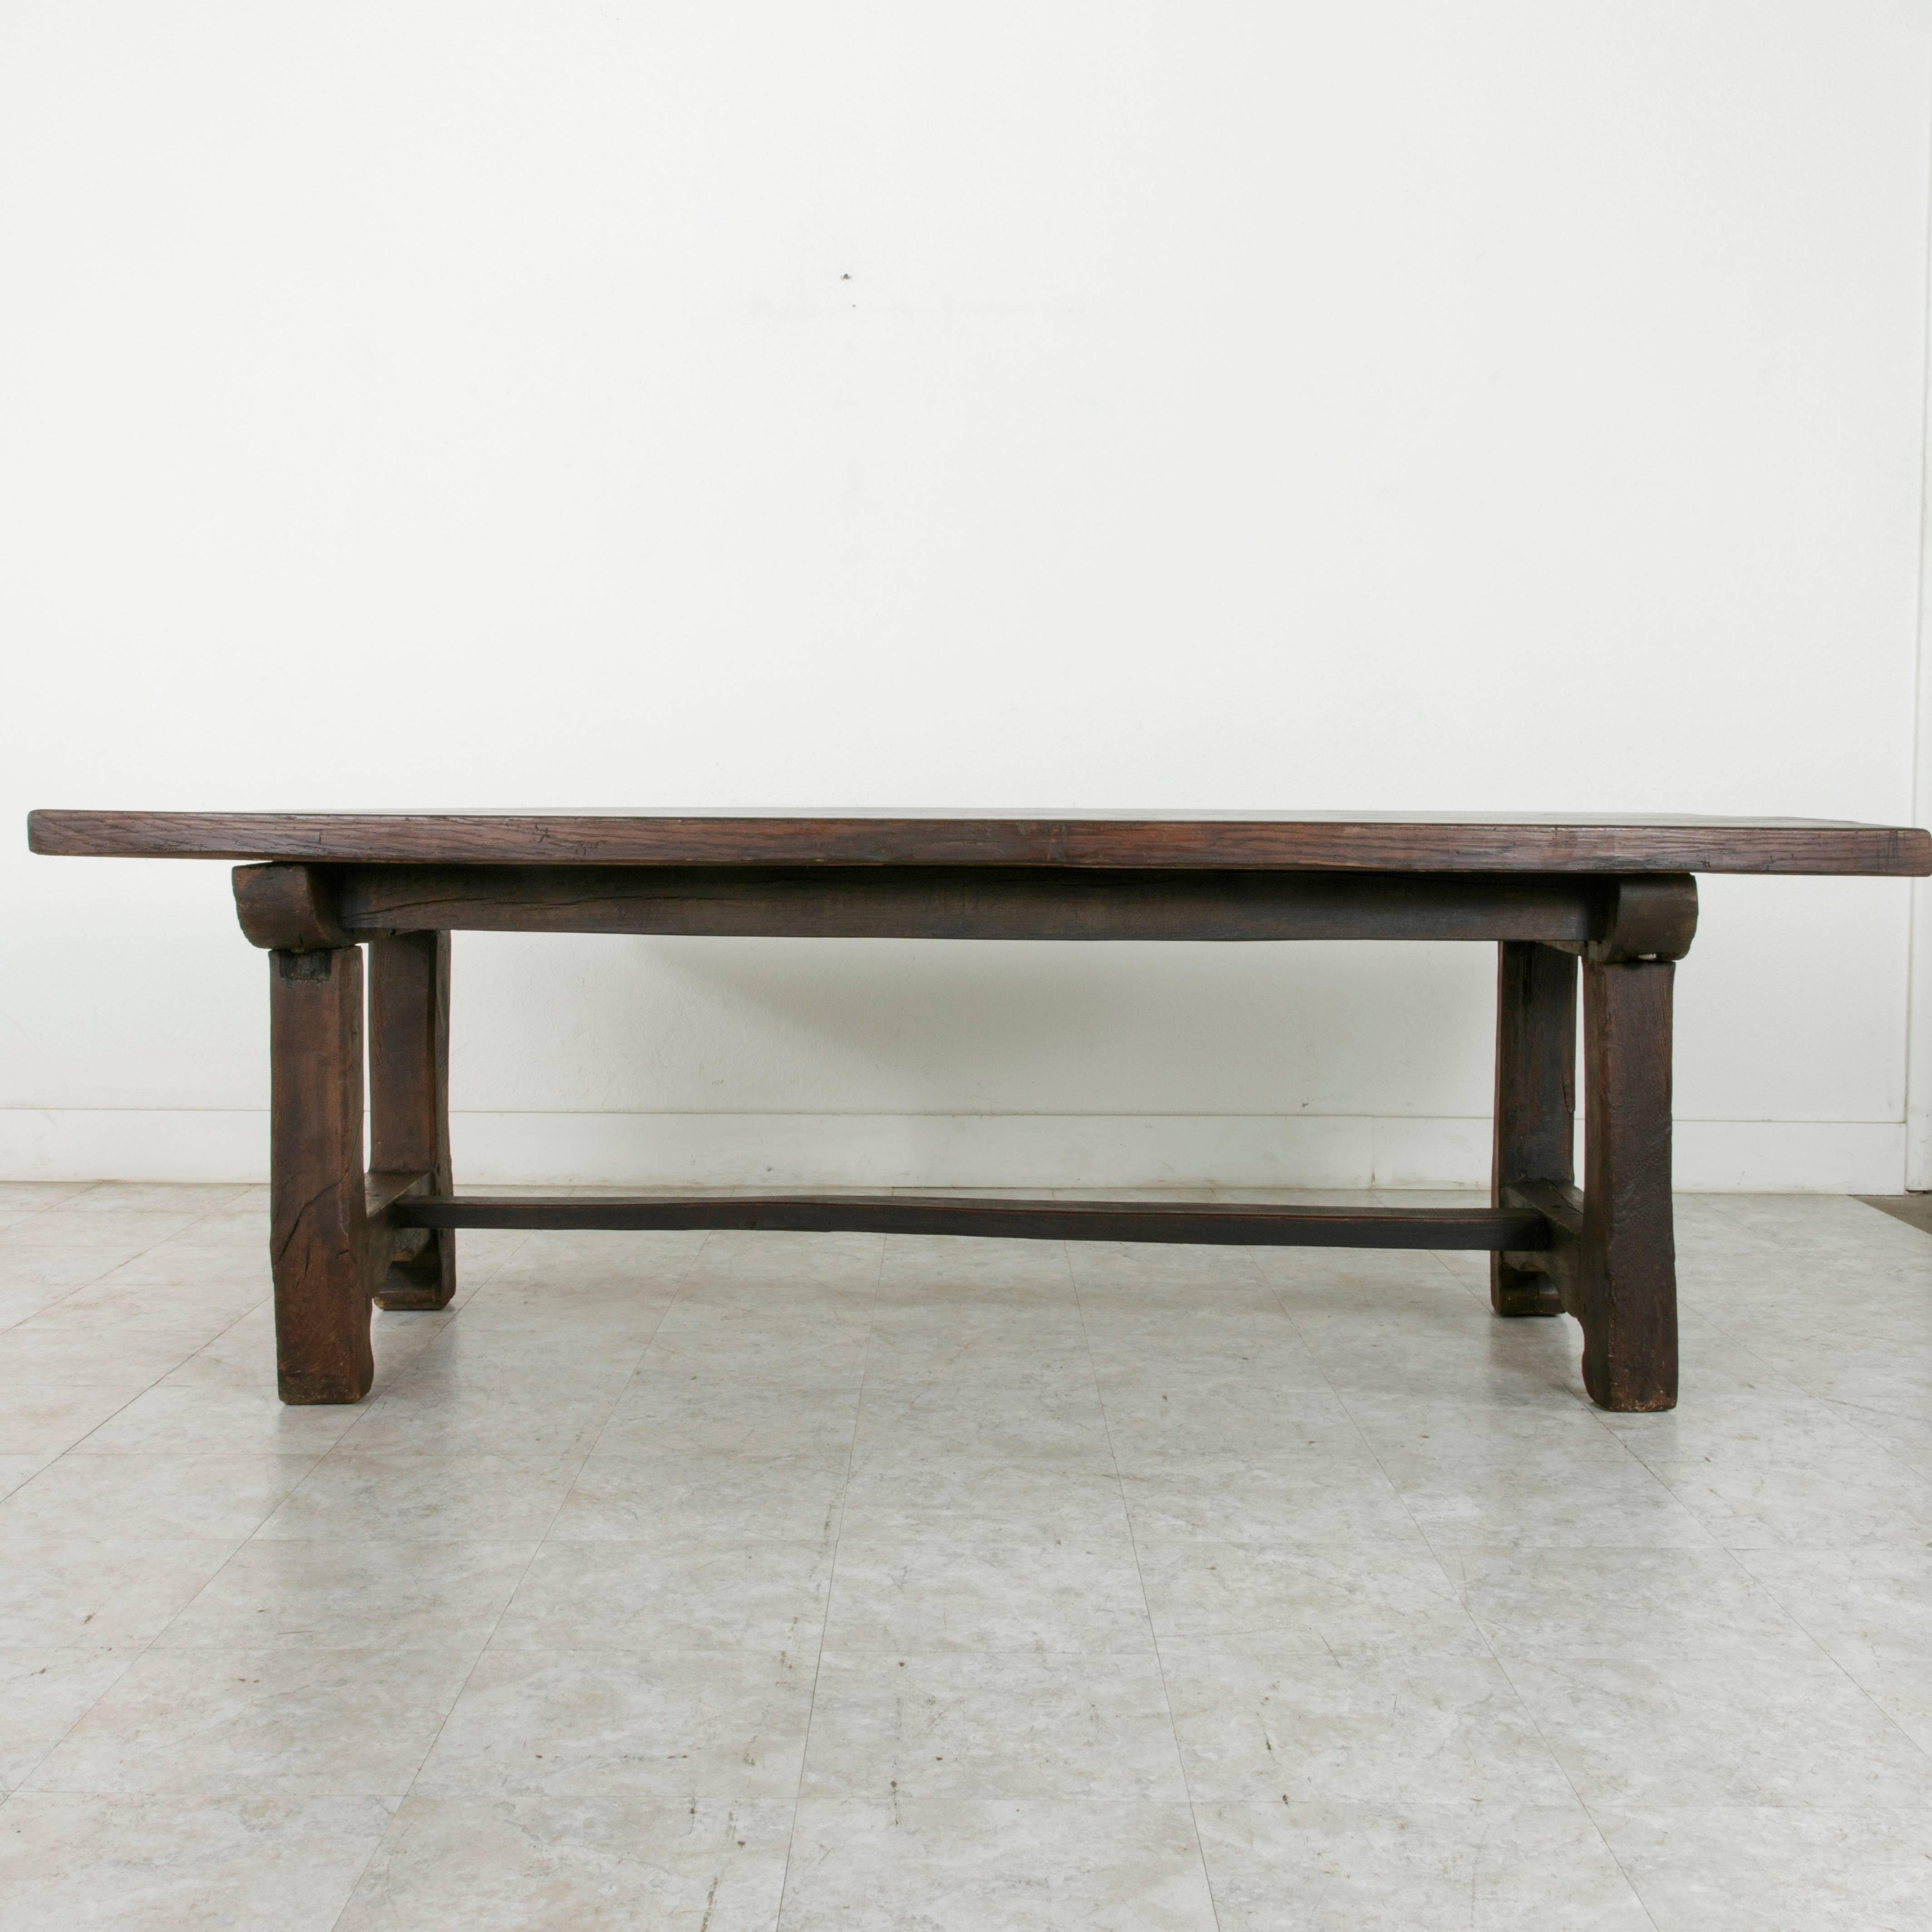 Rustic French Artisan-Made Oak Farm Table Dining Table Made from 18th Century Beams